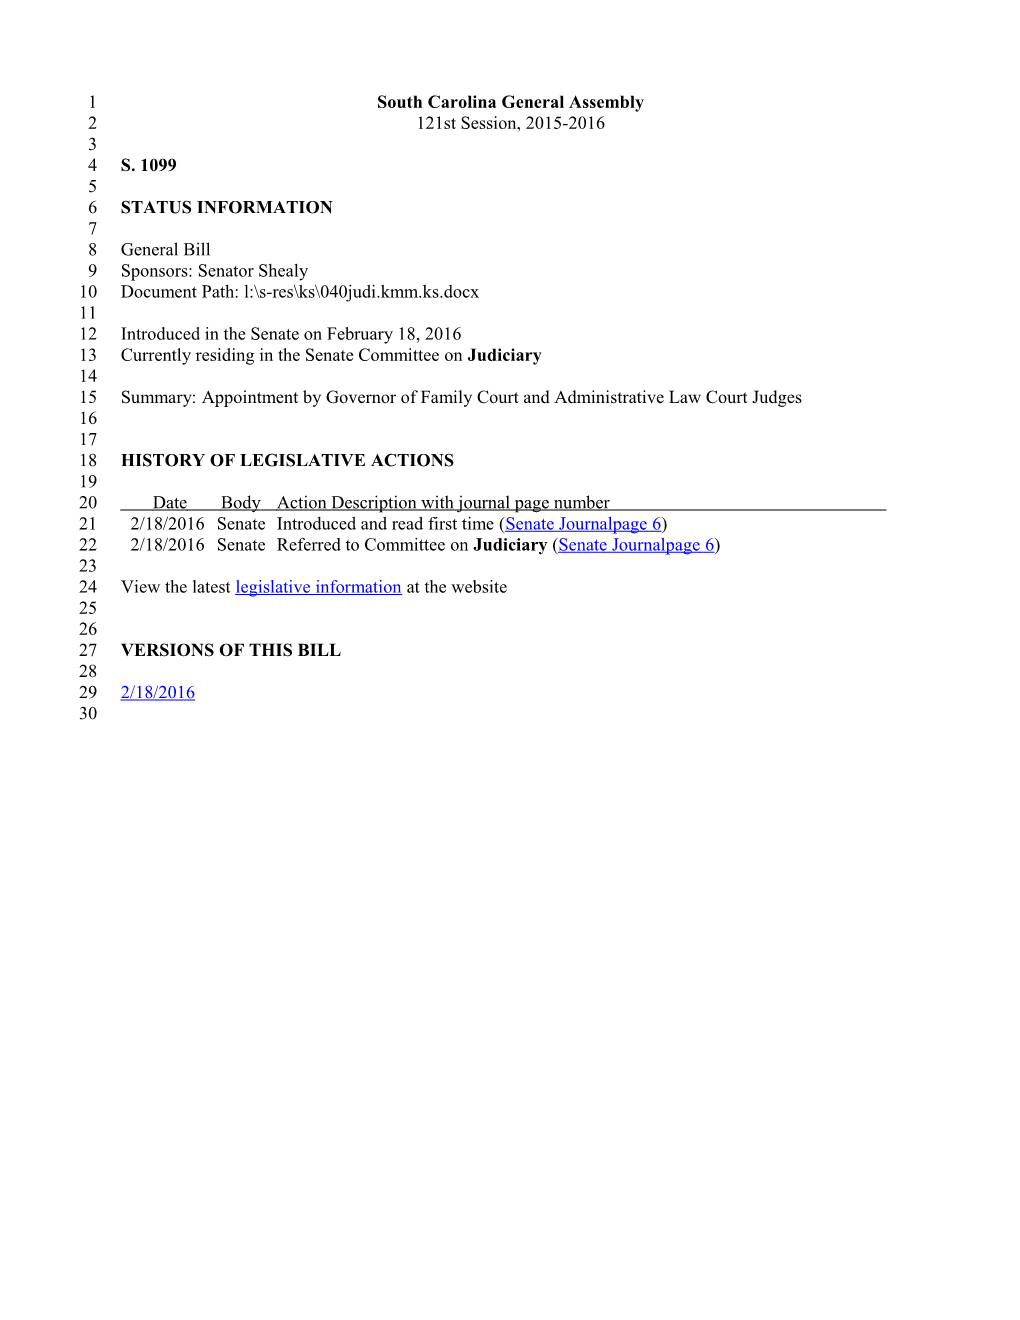 2015-2016 Bill 1099: Appointment by Governor of Family Court and Administrative Law Court